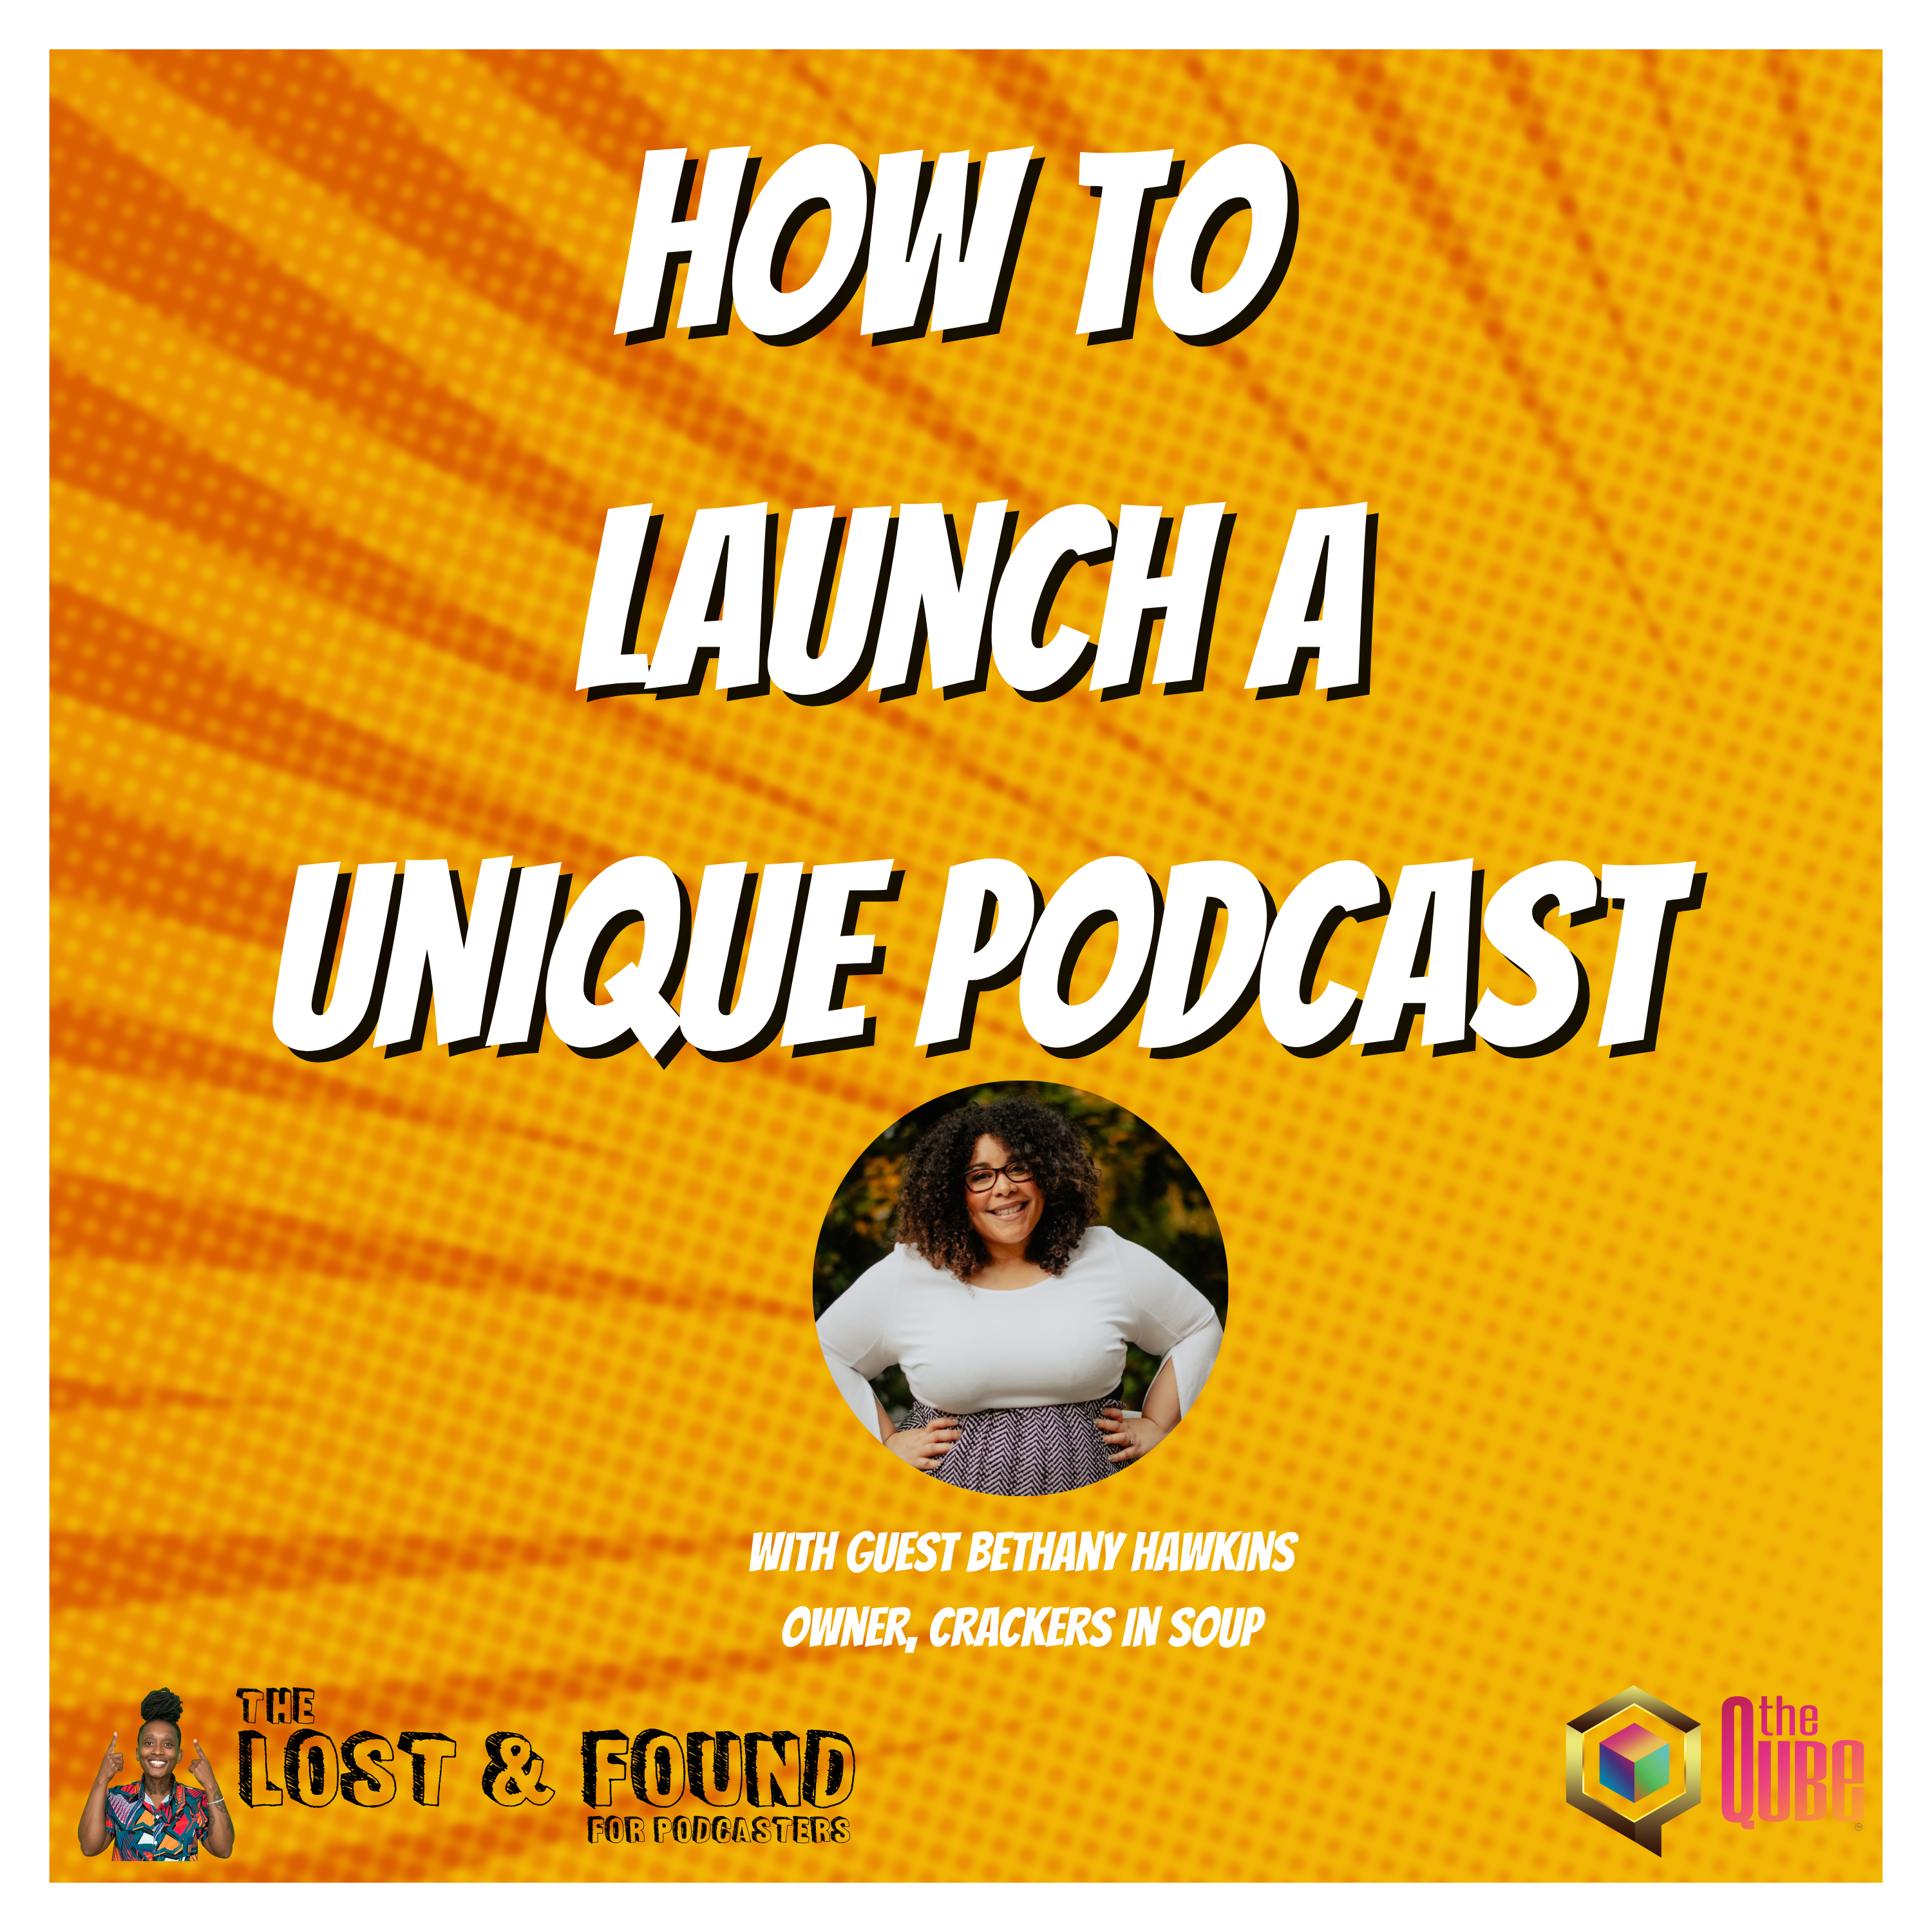 How to Launch A Unique Podcast